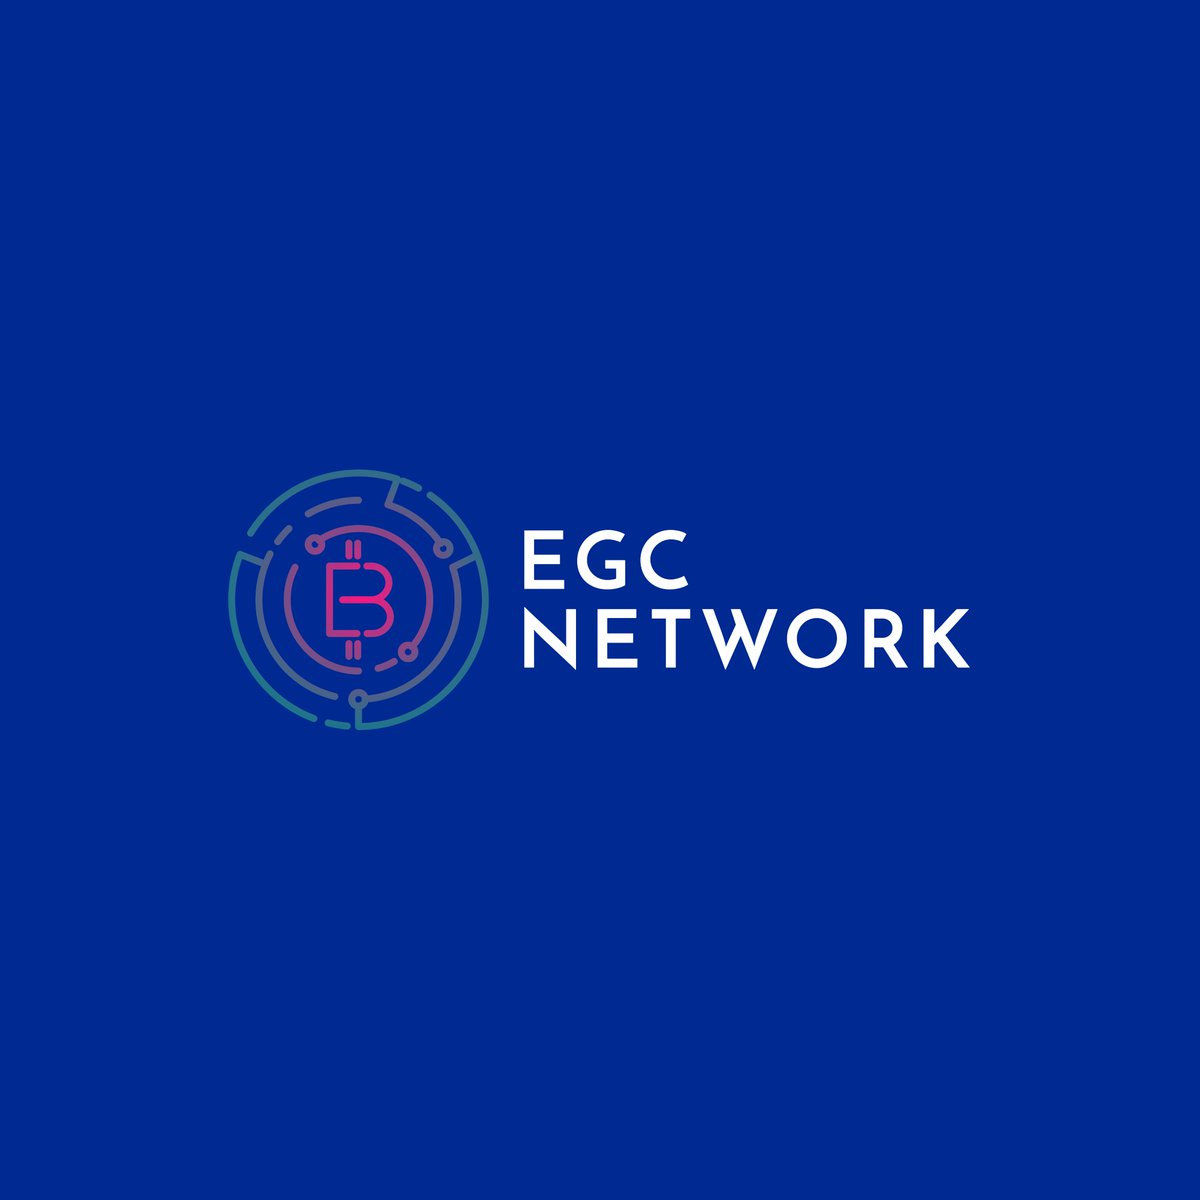 Drop your content! Build your network! Follow, subscribe, support! @NatureProvider @egcuniverse @egcreposts @egcempires @ReplaysEGC @TradePostEGC